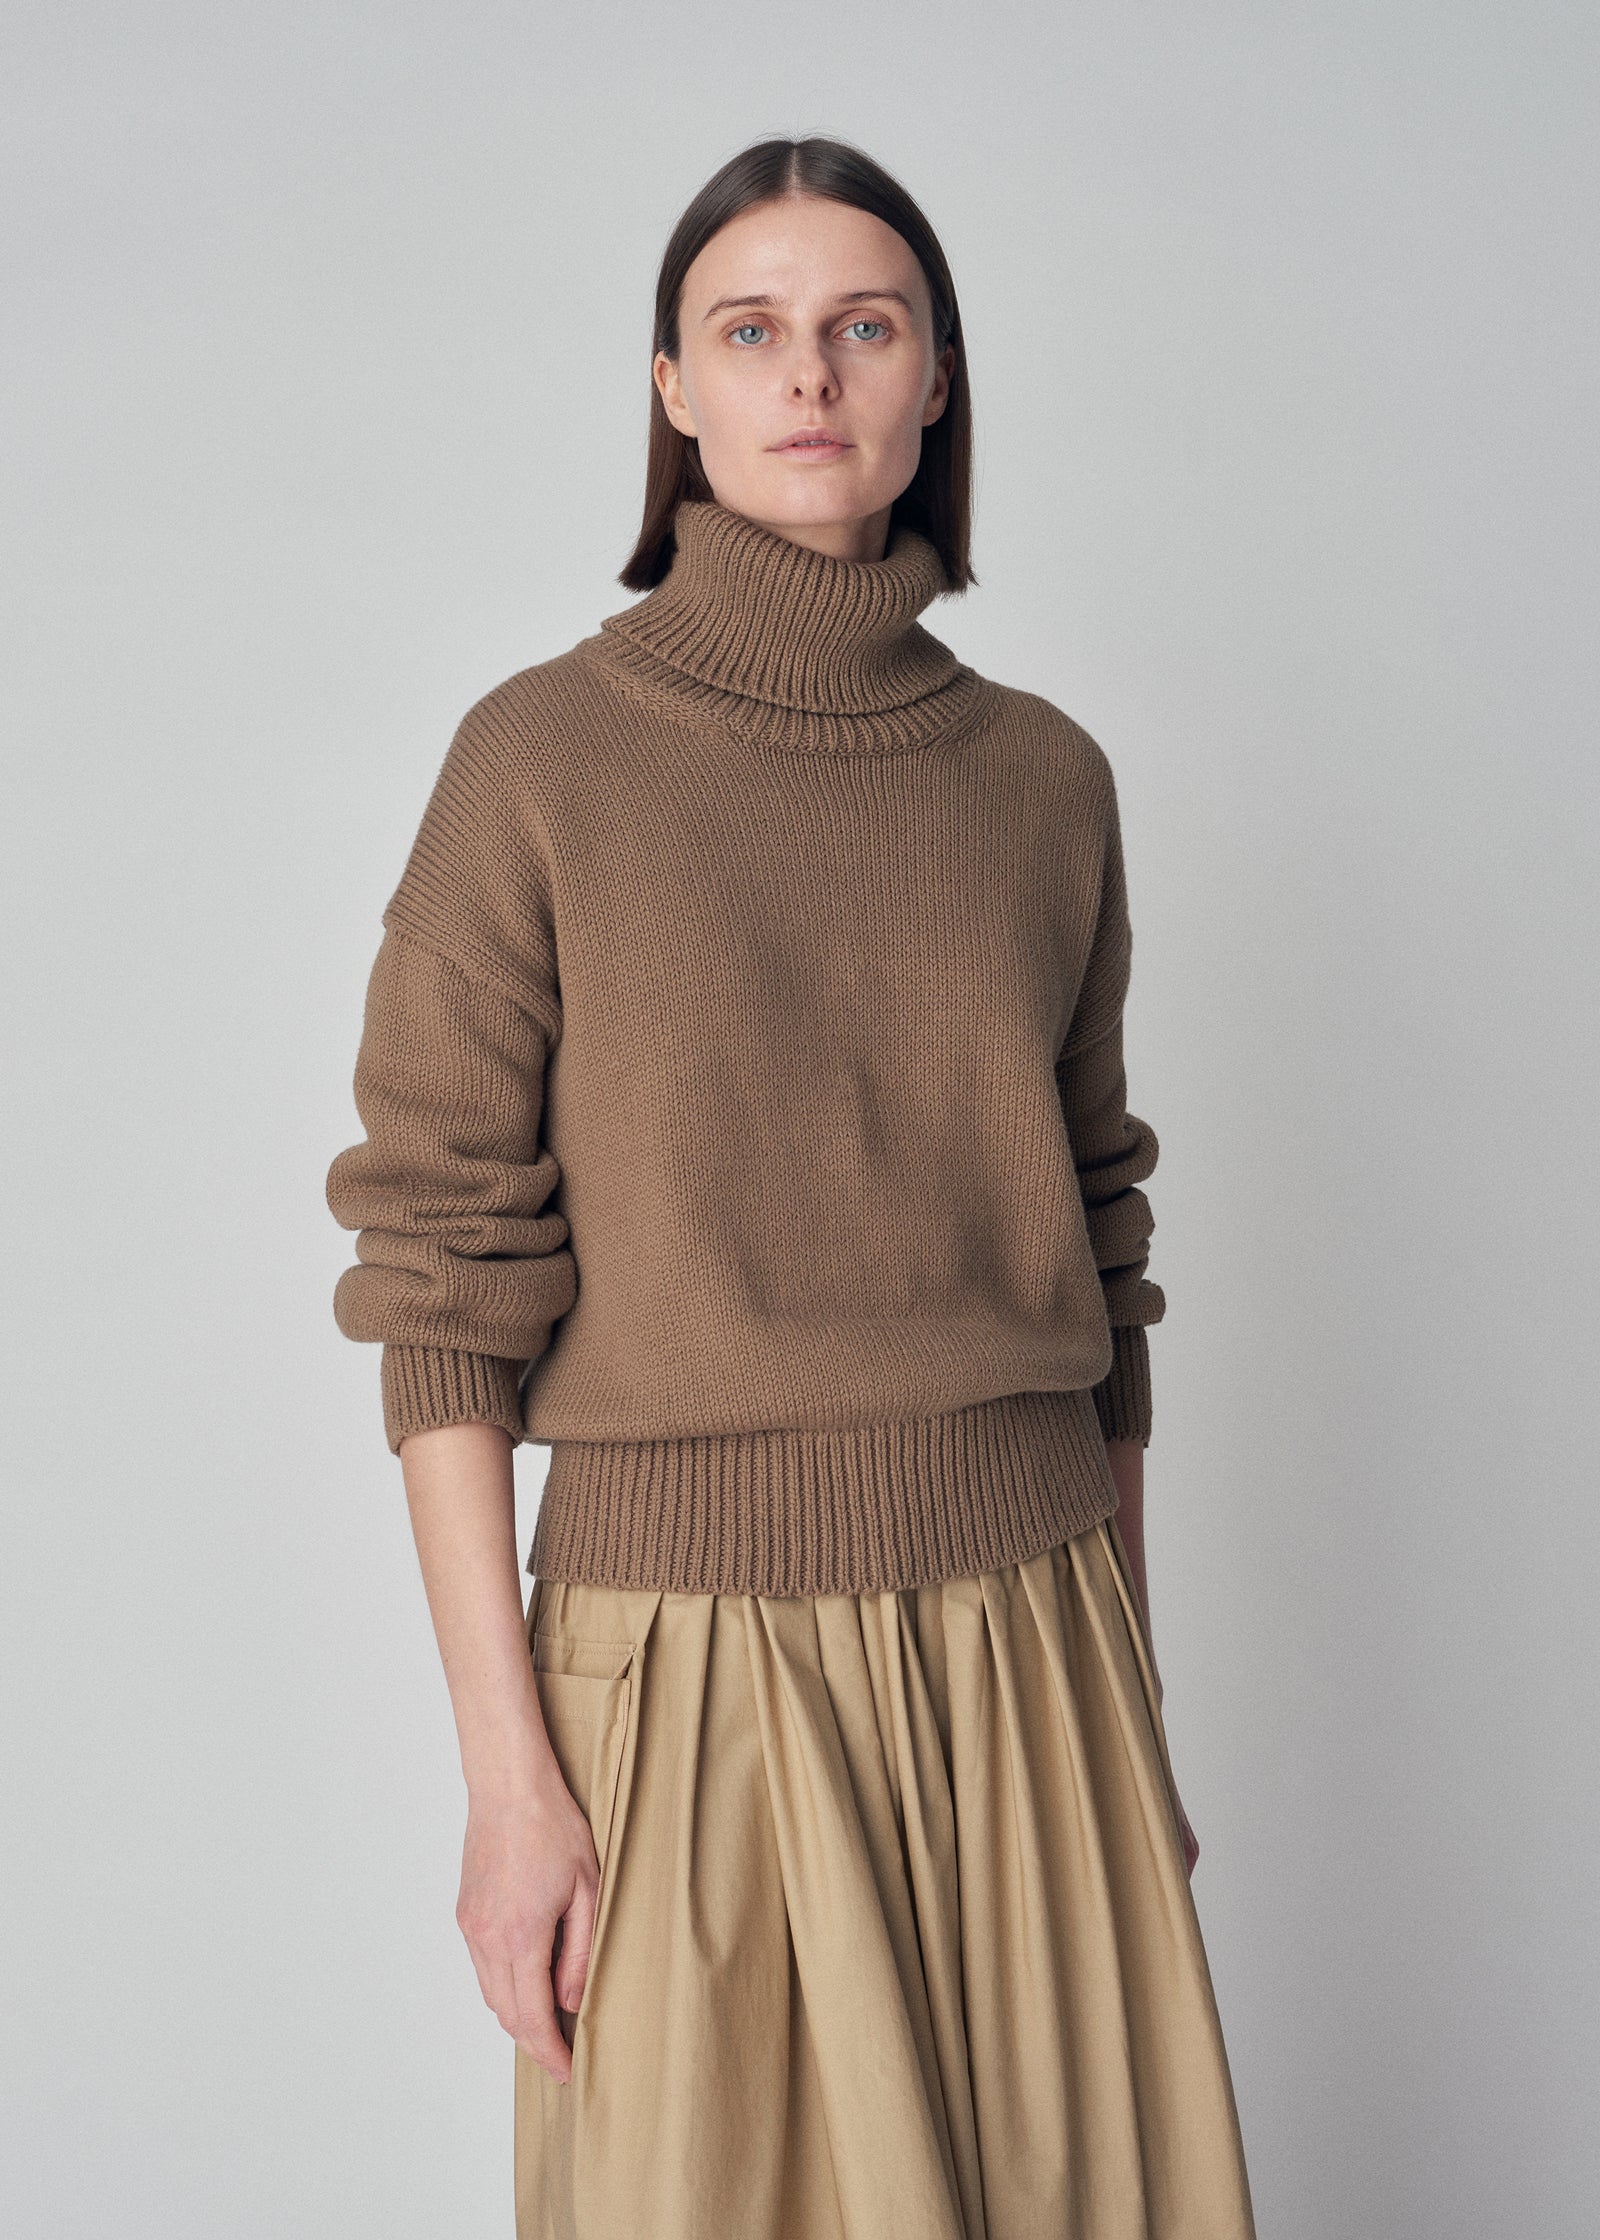 Turtleneck Sweater in Cotton Knit  - Taupe - CO Collections